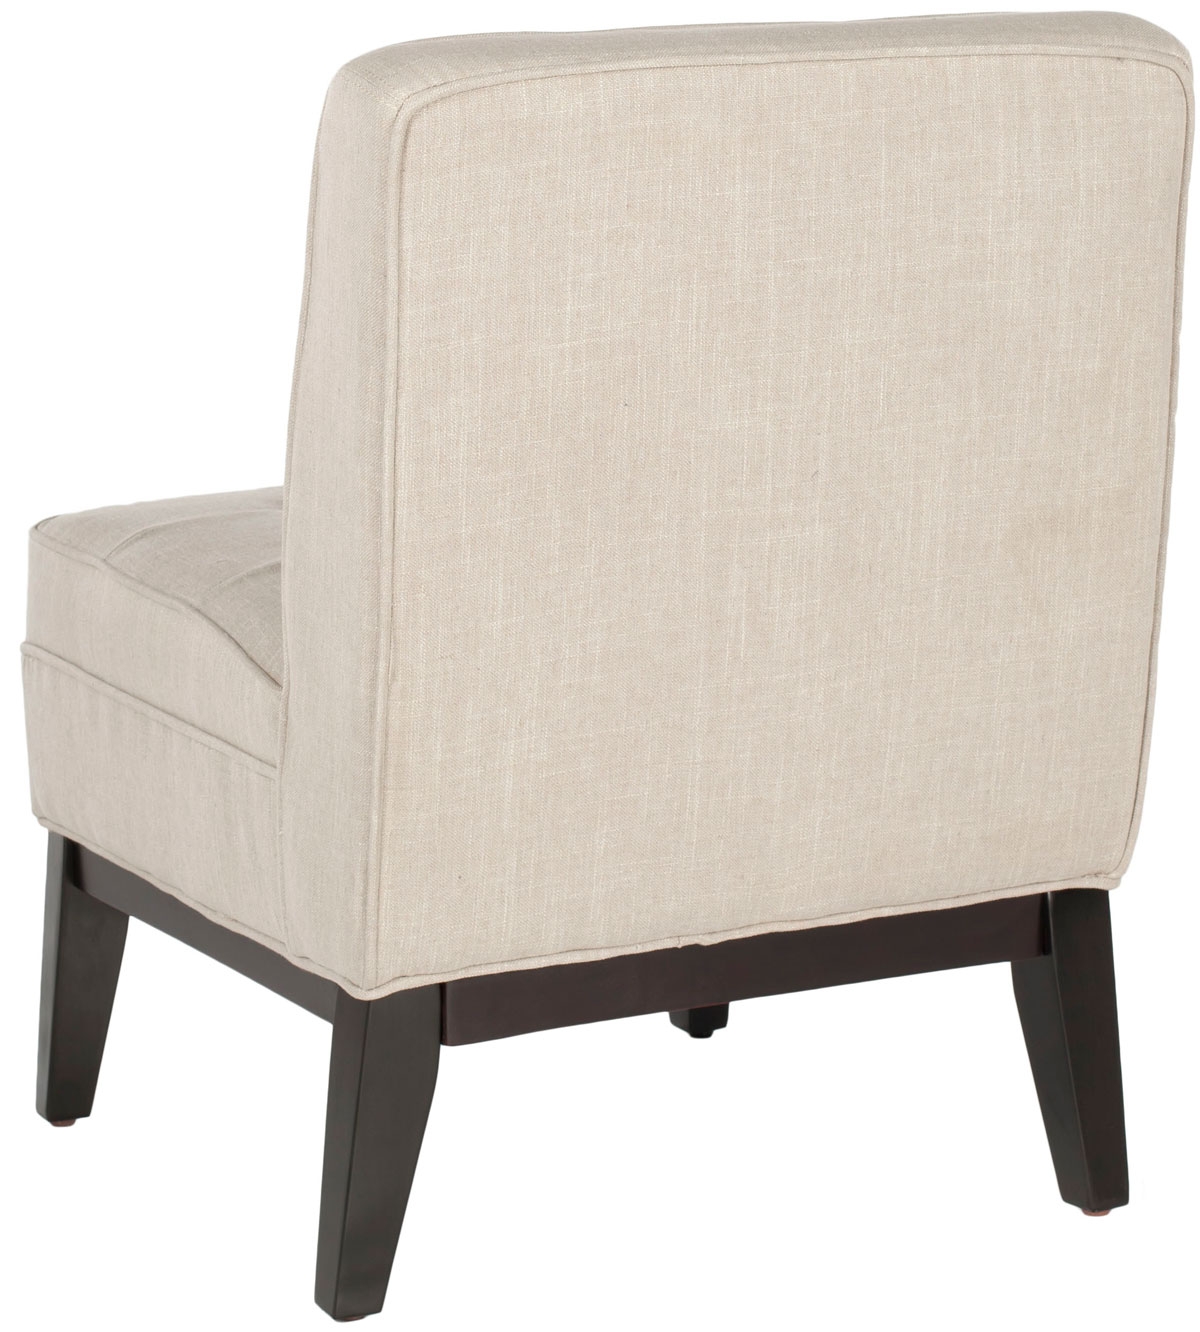 Angel Tufted Armless Club Chair - Off White - Arlo Home - Image 3